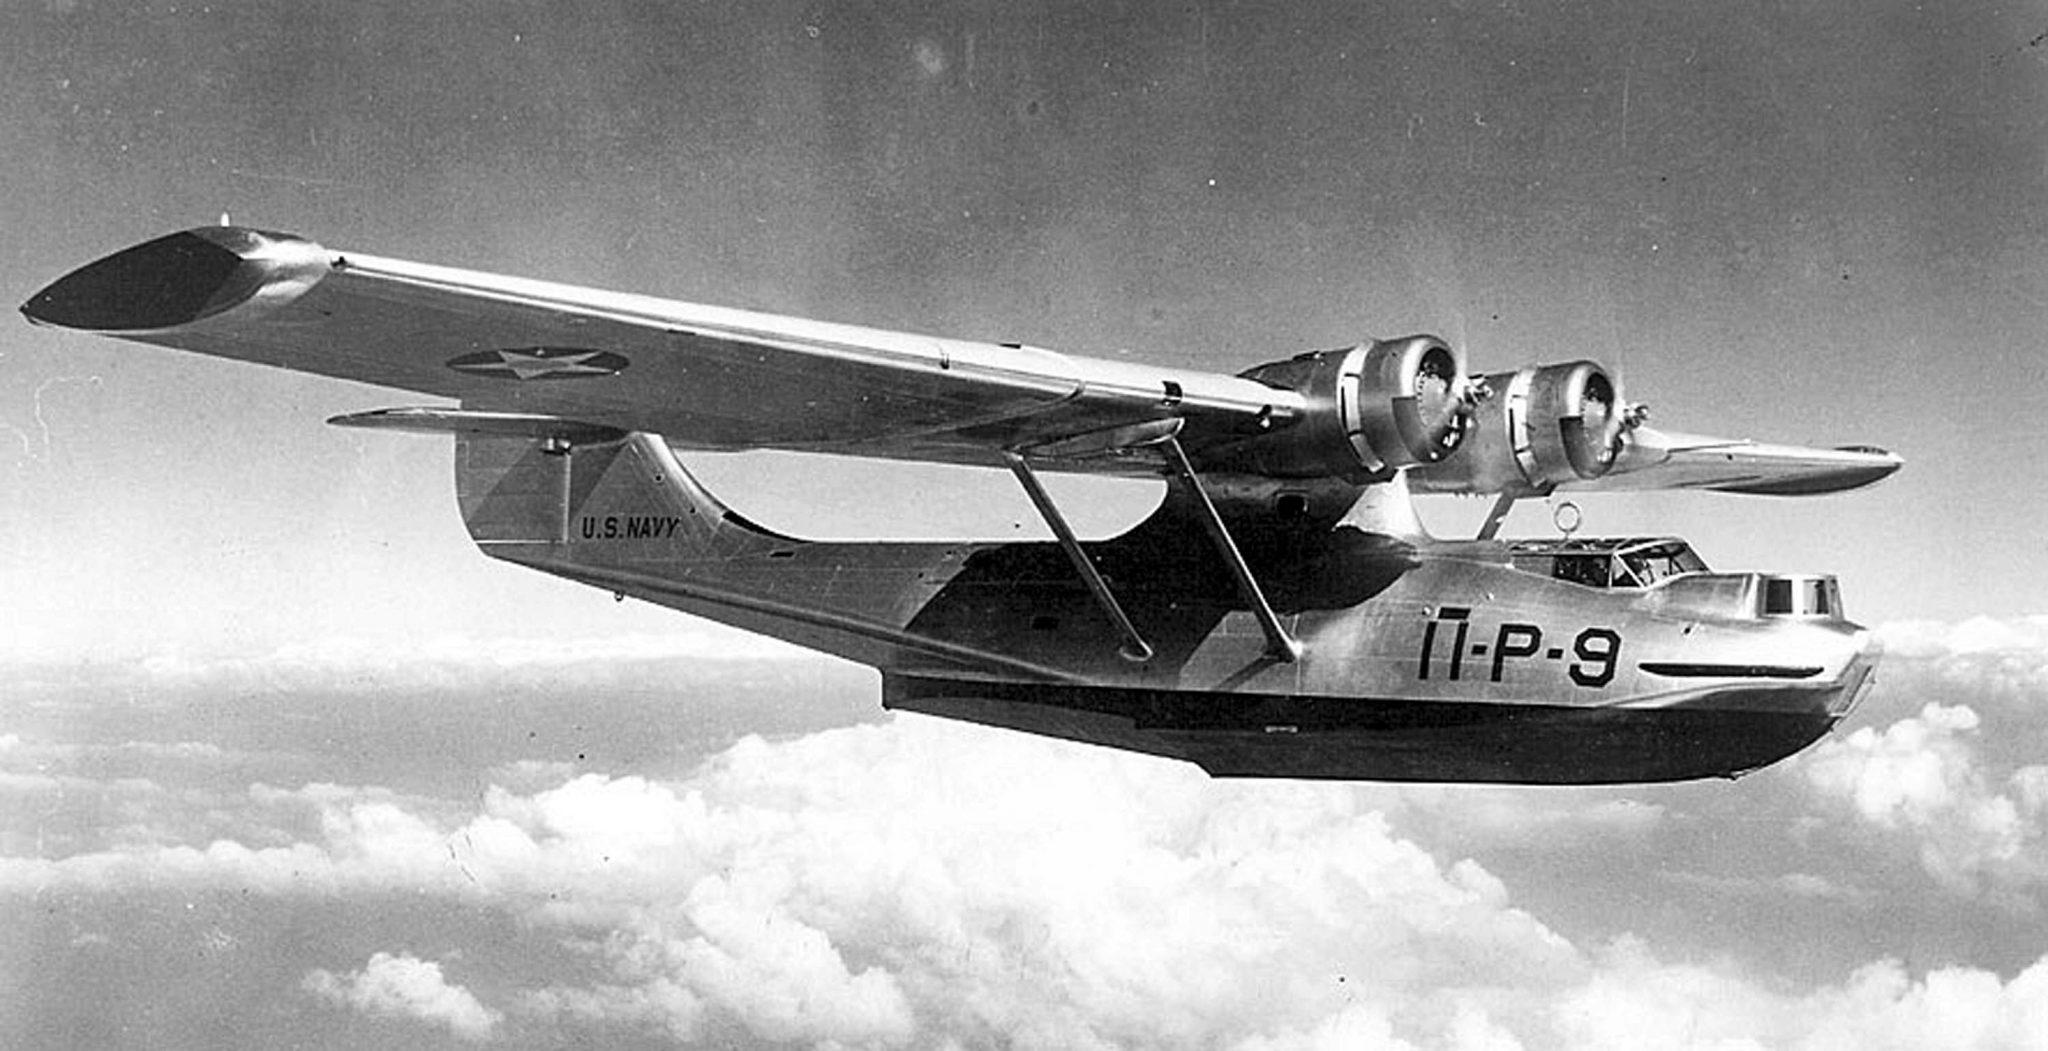 Consolidated Pby Catalina Wallpapers